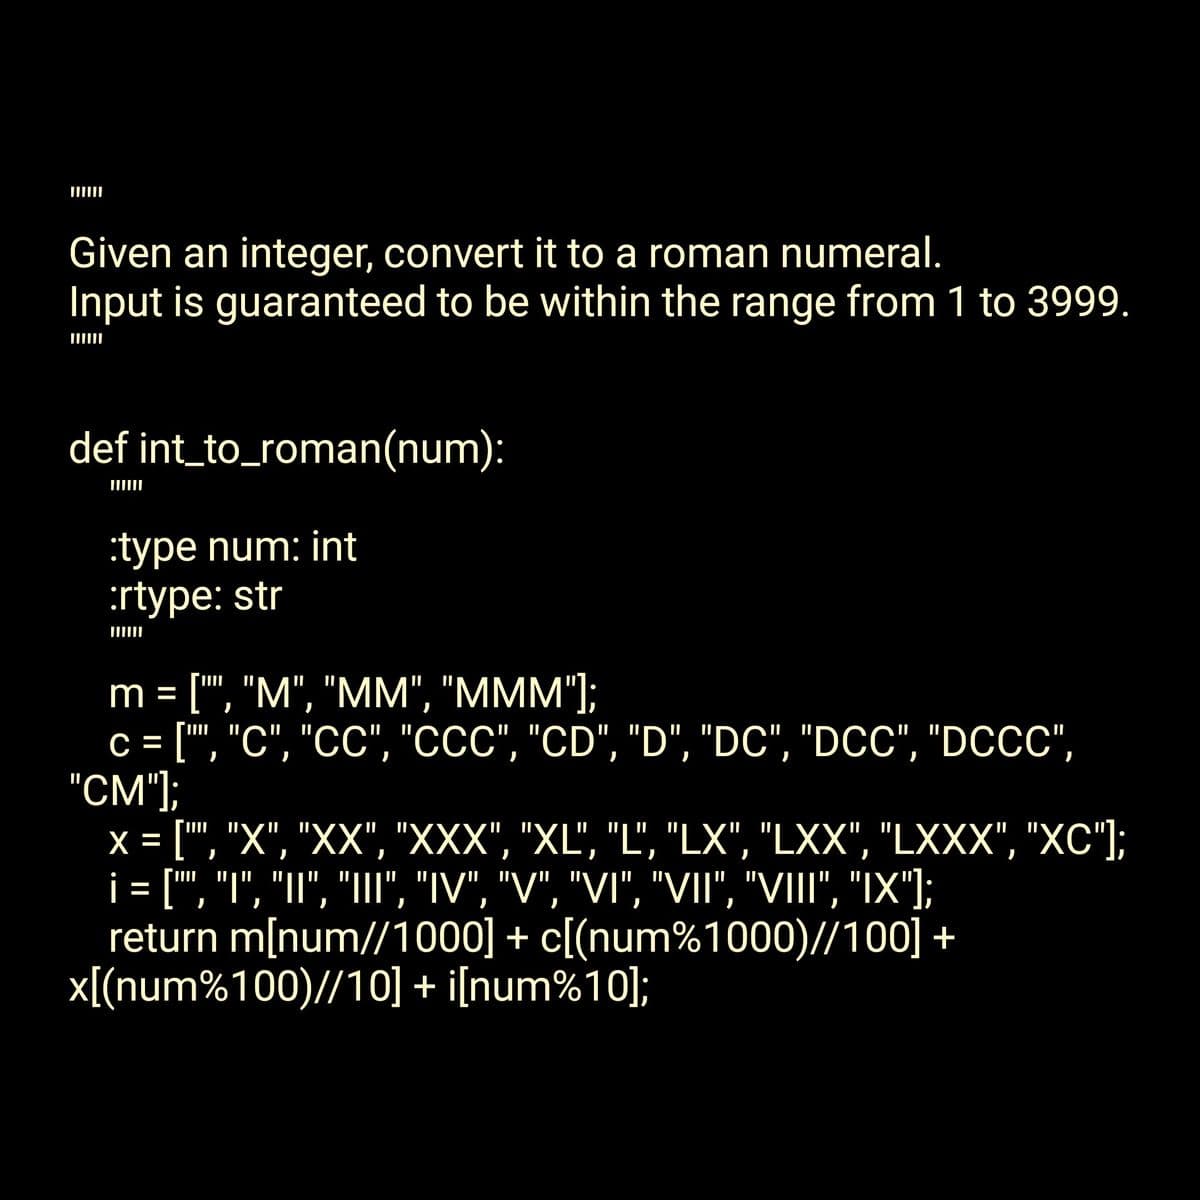 Given an integer, convert it to a roman numeral.
Input is guaranteed to be within the range from 1 to 3999.
def int_to_roman(num):
:type num: int
:rtype: str
||||||
m = ["", "M", "MM", "MMM"];
c = ["", "C", "CC", "CCC", "CD", "D", "DC", "DCC", "DCCC",
"CM"];
x = ["", "X", "XX", "XXX", "XL", "L", "LX", "LXX", "LXXX", "XC"];
¡ = [", "T"', 'T", "III", "IV", "V", "VI", "VII", "VIII", "IX"];
return m[num//1000] + c[(num%1000)//100] +
x[(num%100)//10] + i[num%10];